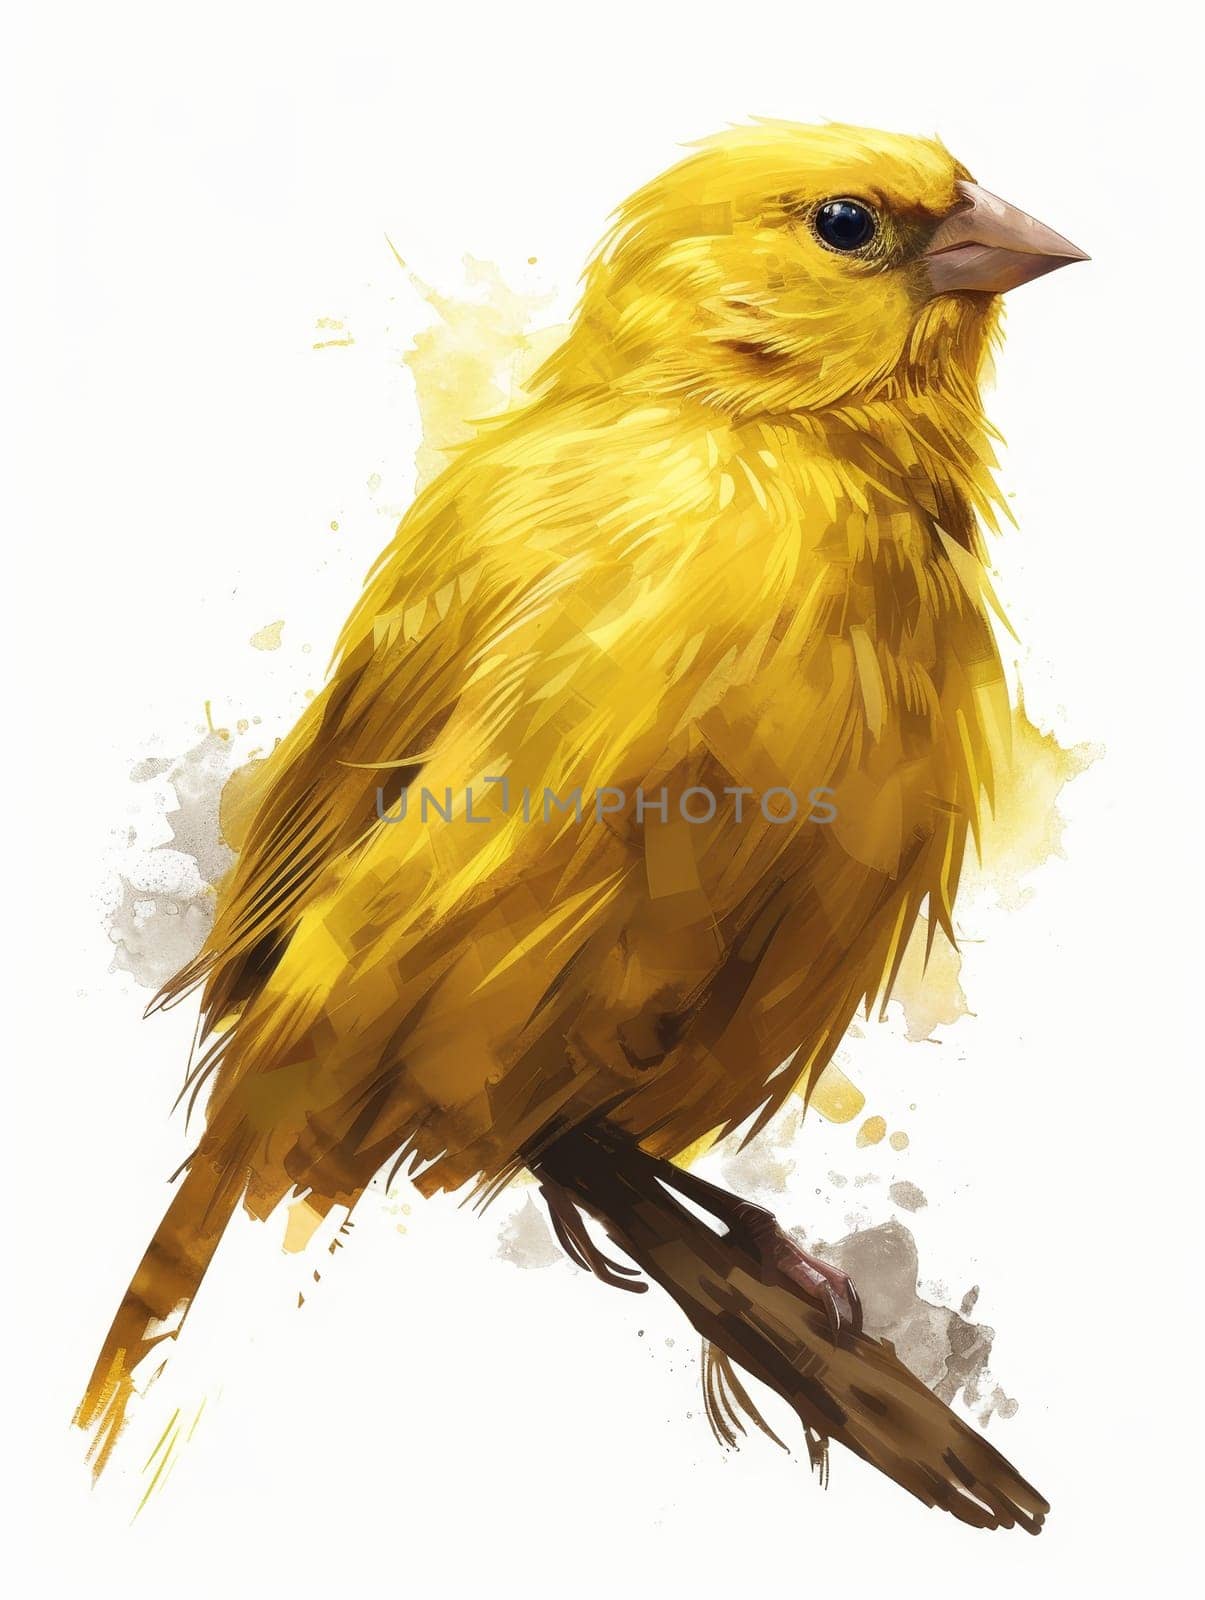 Artistic illustration of a yellow bird with dynamic brush strokes and a splash of watercolor effects